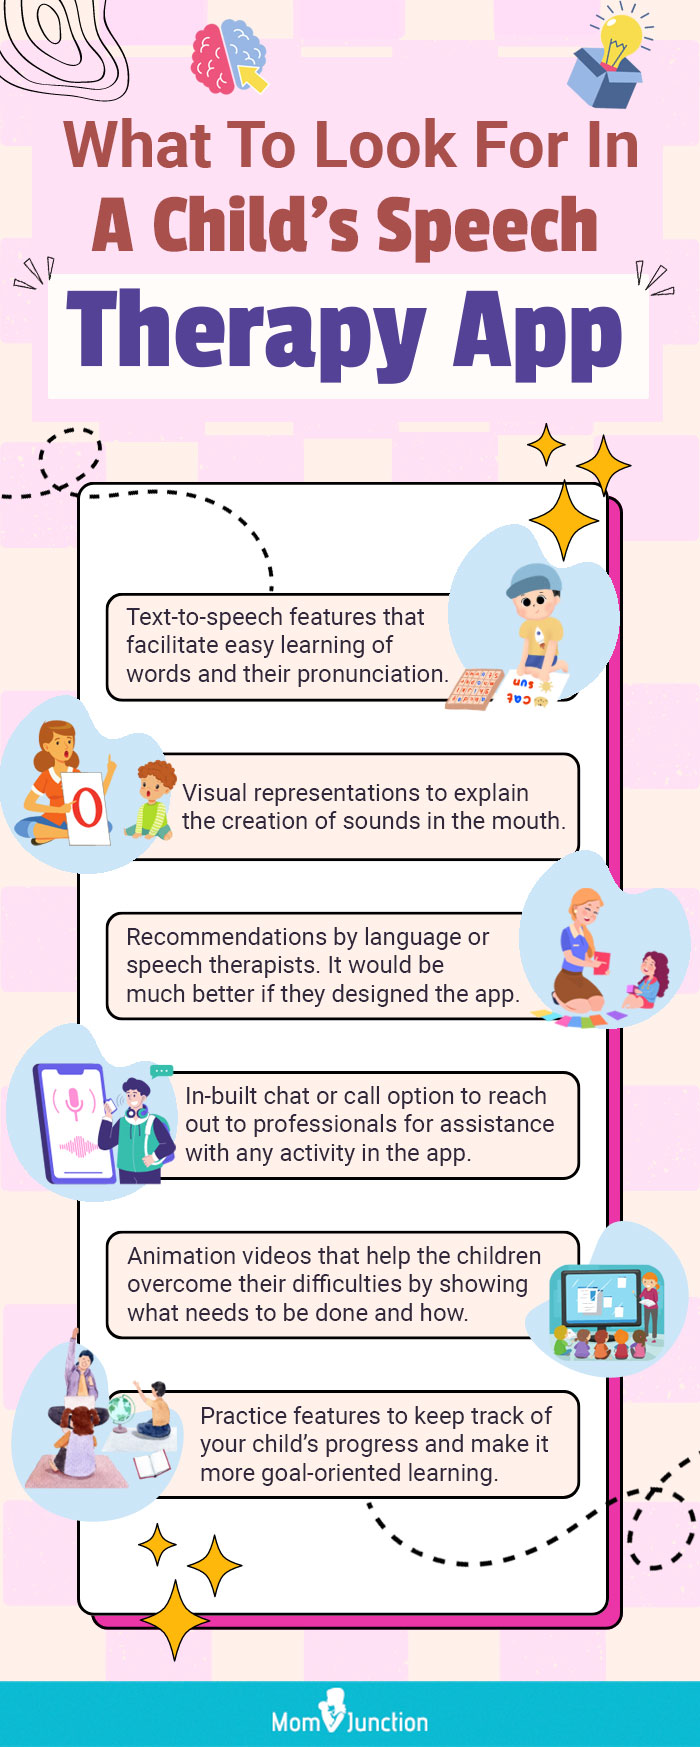 https://www.momjunction.com/wp-content/uploads/2022/11/What-To-Look-For-In-A-Childs-Speech-Therapy-App.jpg